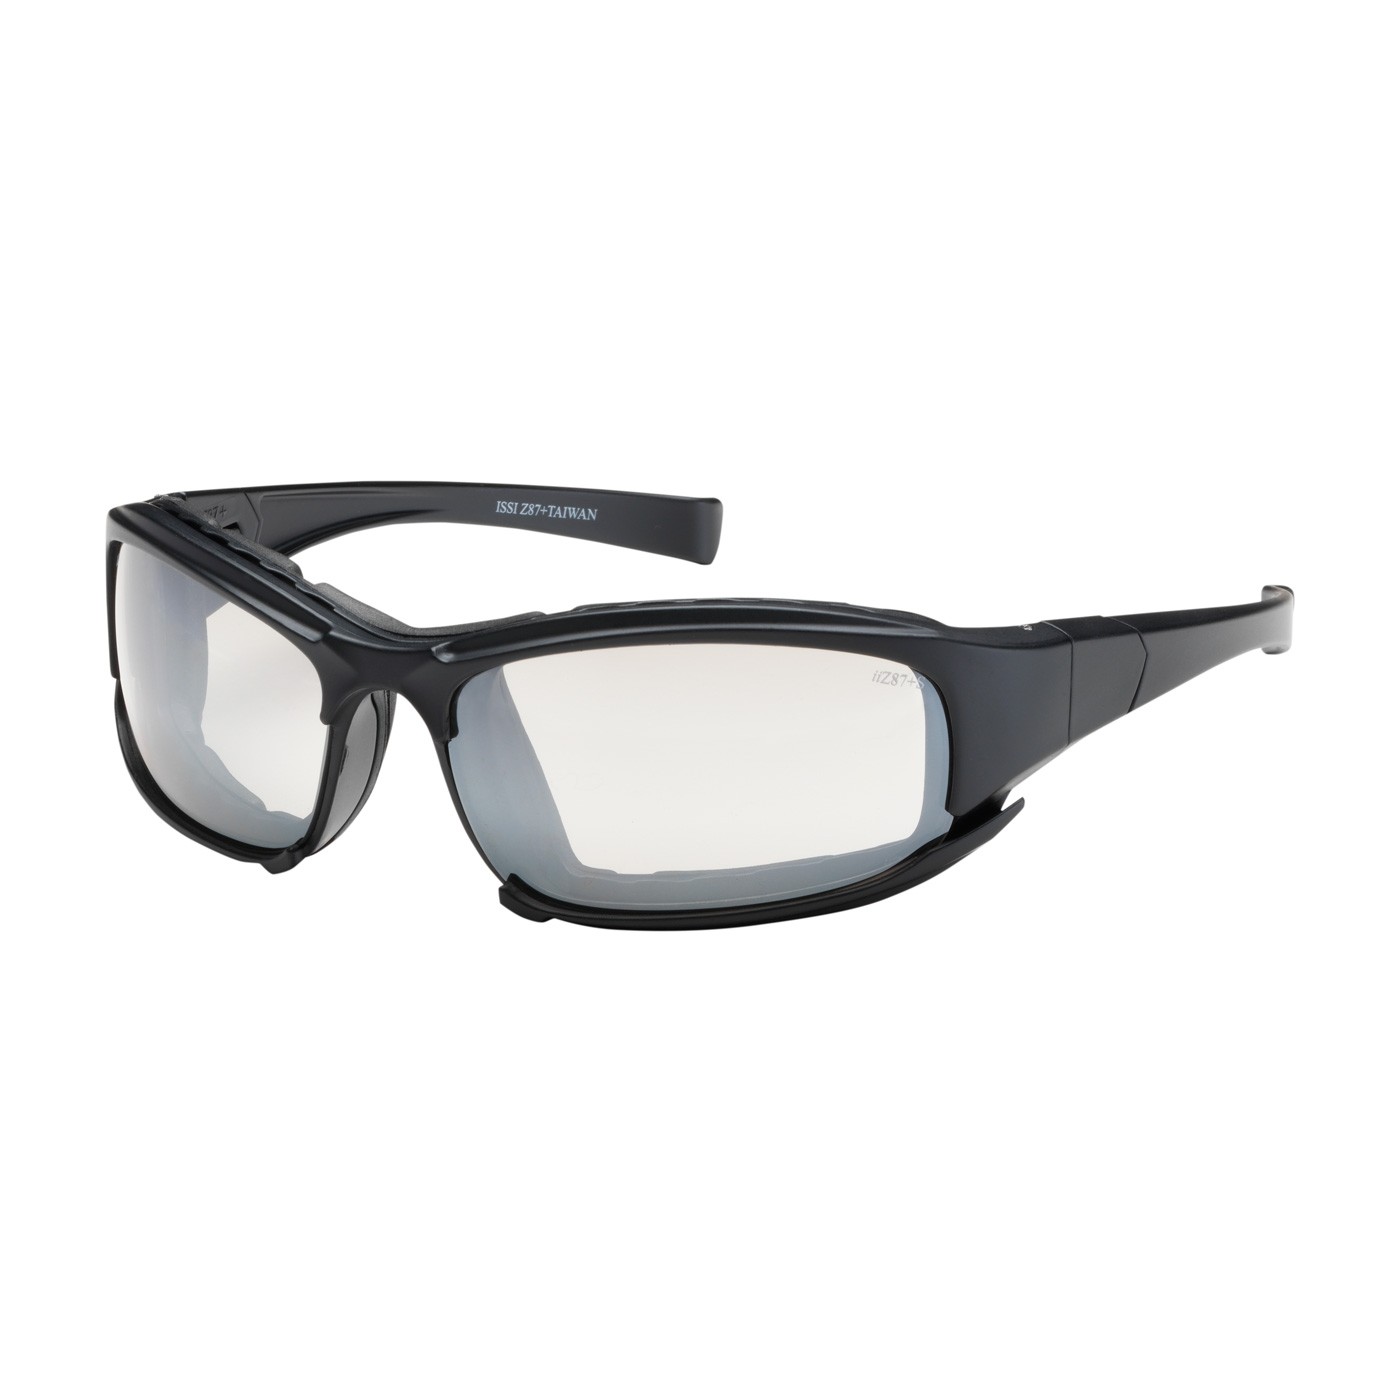 Cefiro™ Full Frame Safety Glasses with Black Frame, Rubber Foam Padding, I/O Lens and Anti-Scratch / Anti-Fog Coating  (#250-CE-10092)